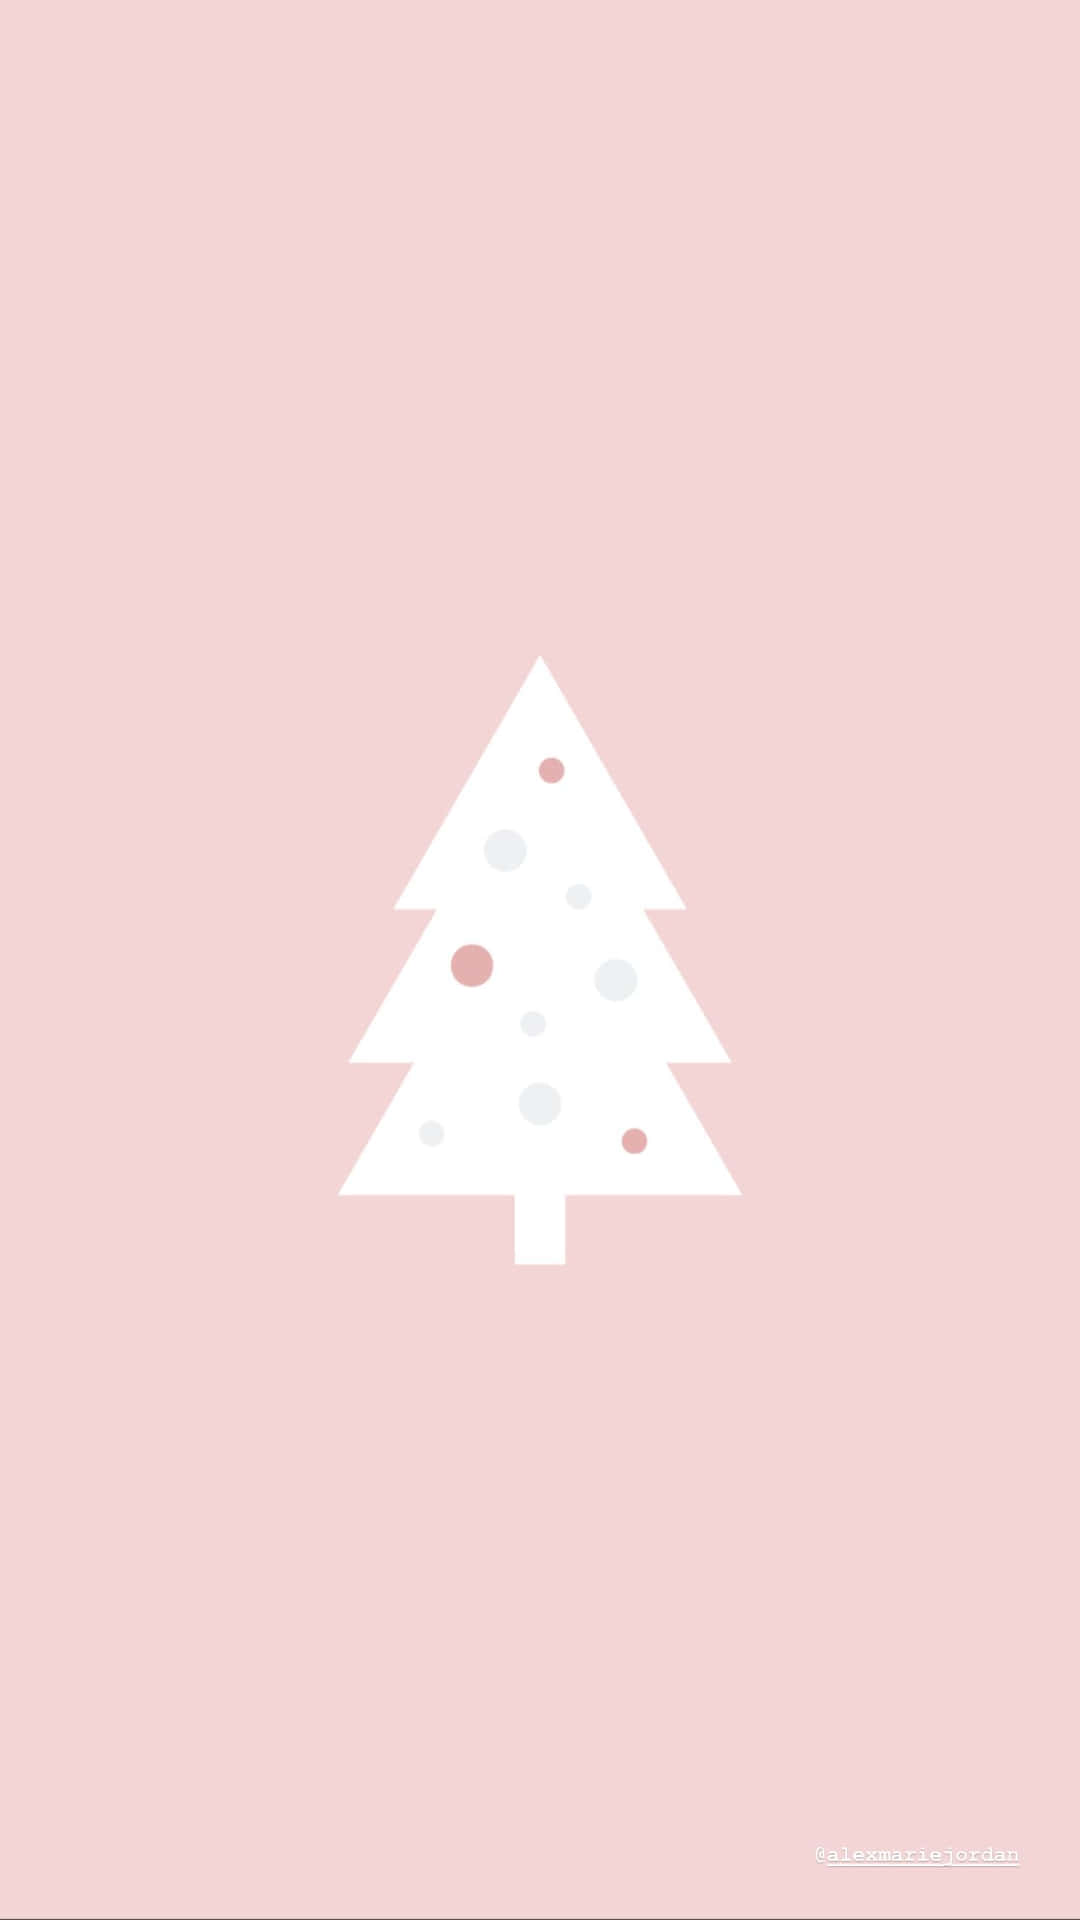 Get into the festive spirit with this beautiful pink Christmas tree! Wallpaper